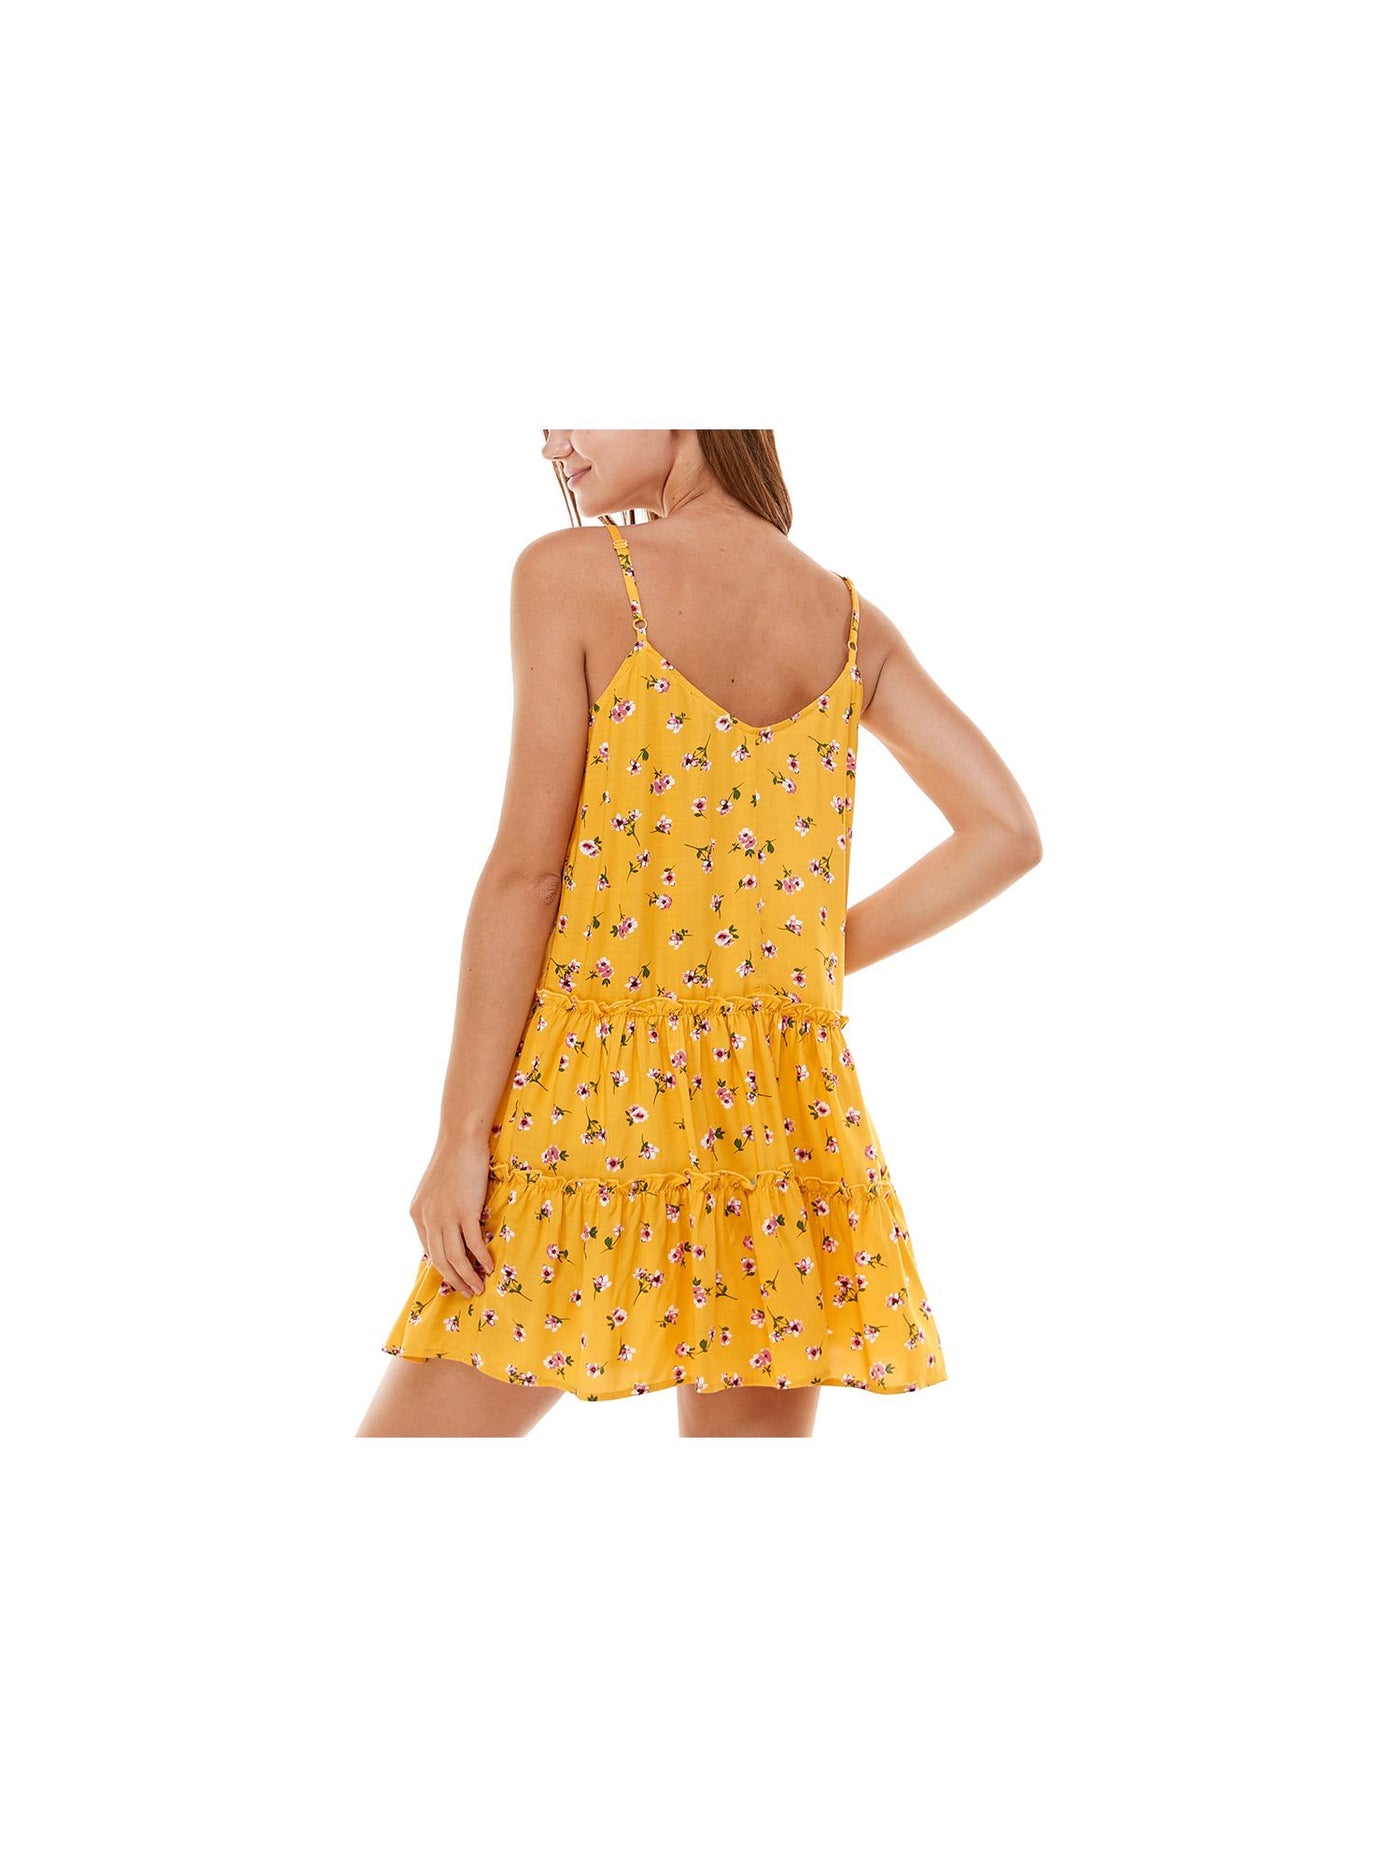 AS U WISH Womens Yellow Unlined Double Ruffled Tiers Pullover Floral Spaghetti Strap Scoop Neck Short Shift Dress Juniors XL